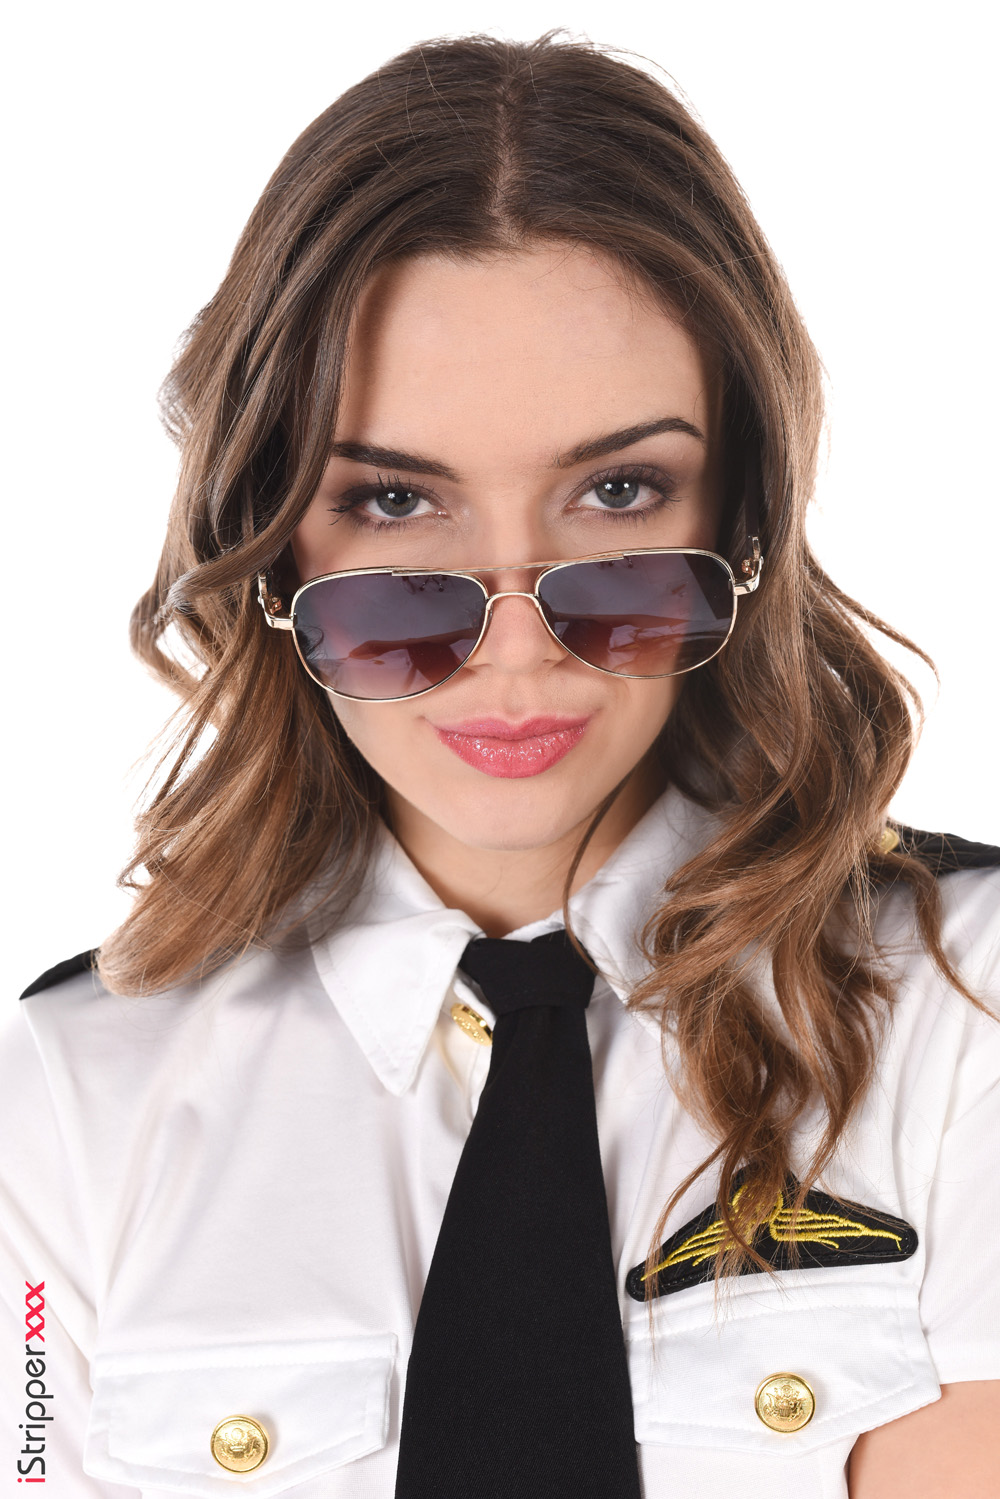 Hope Heaven sexy airline pilot reaches new highs with a dildo up her twat